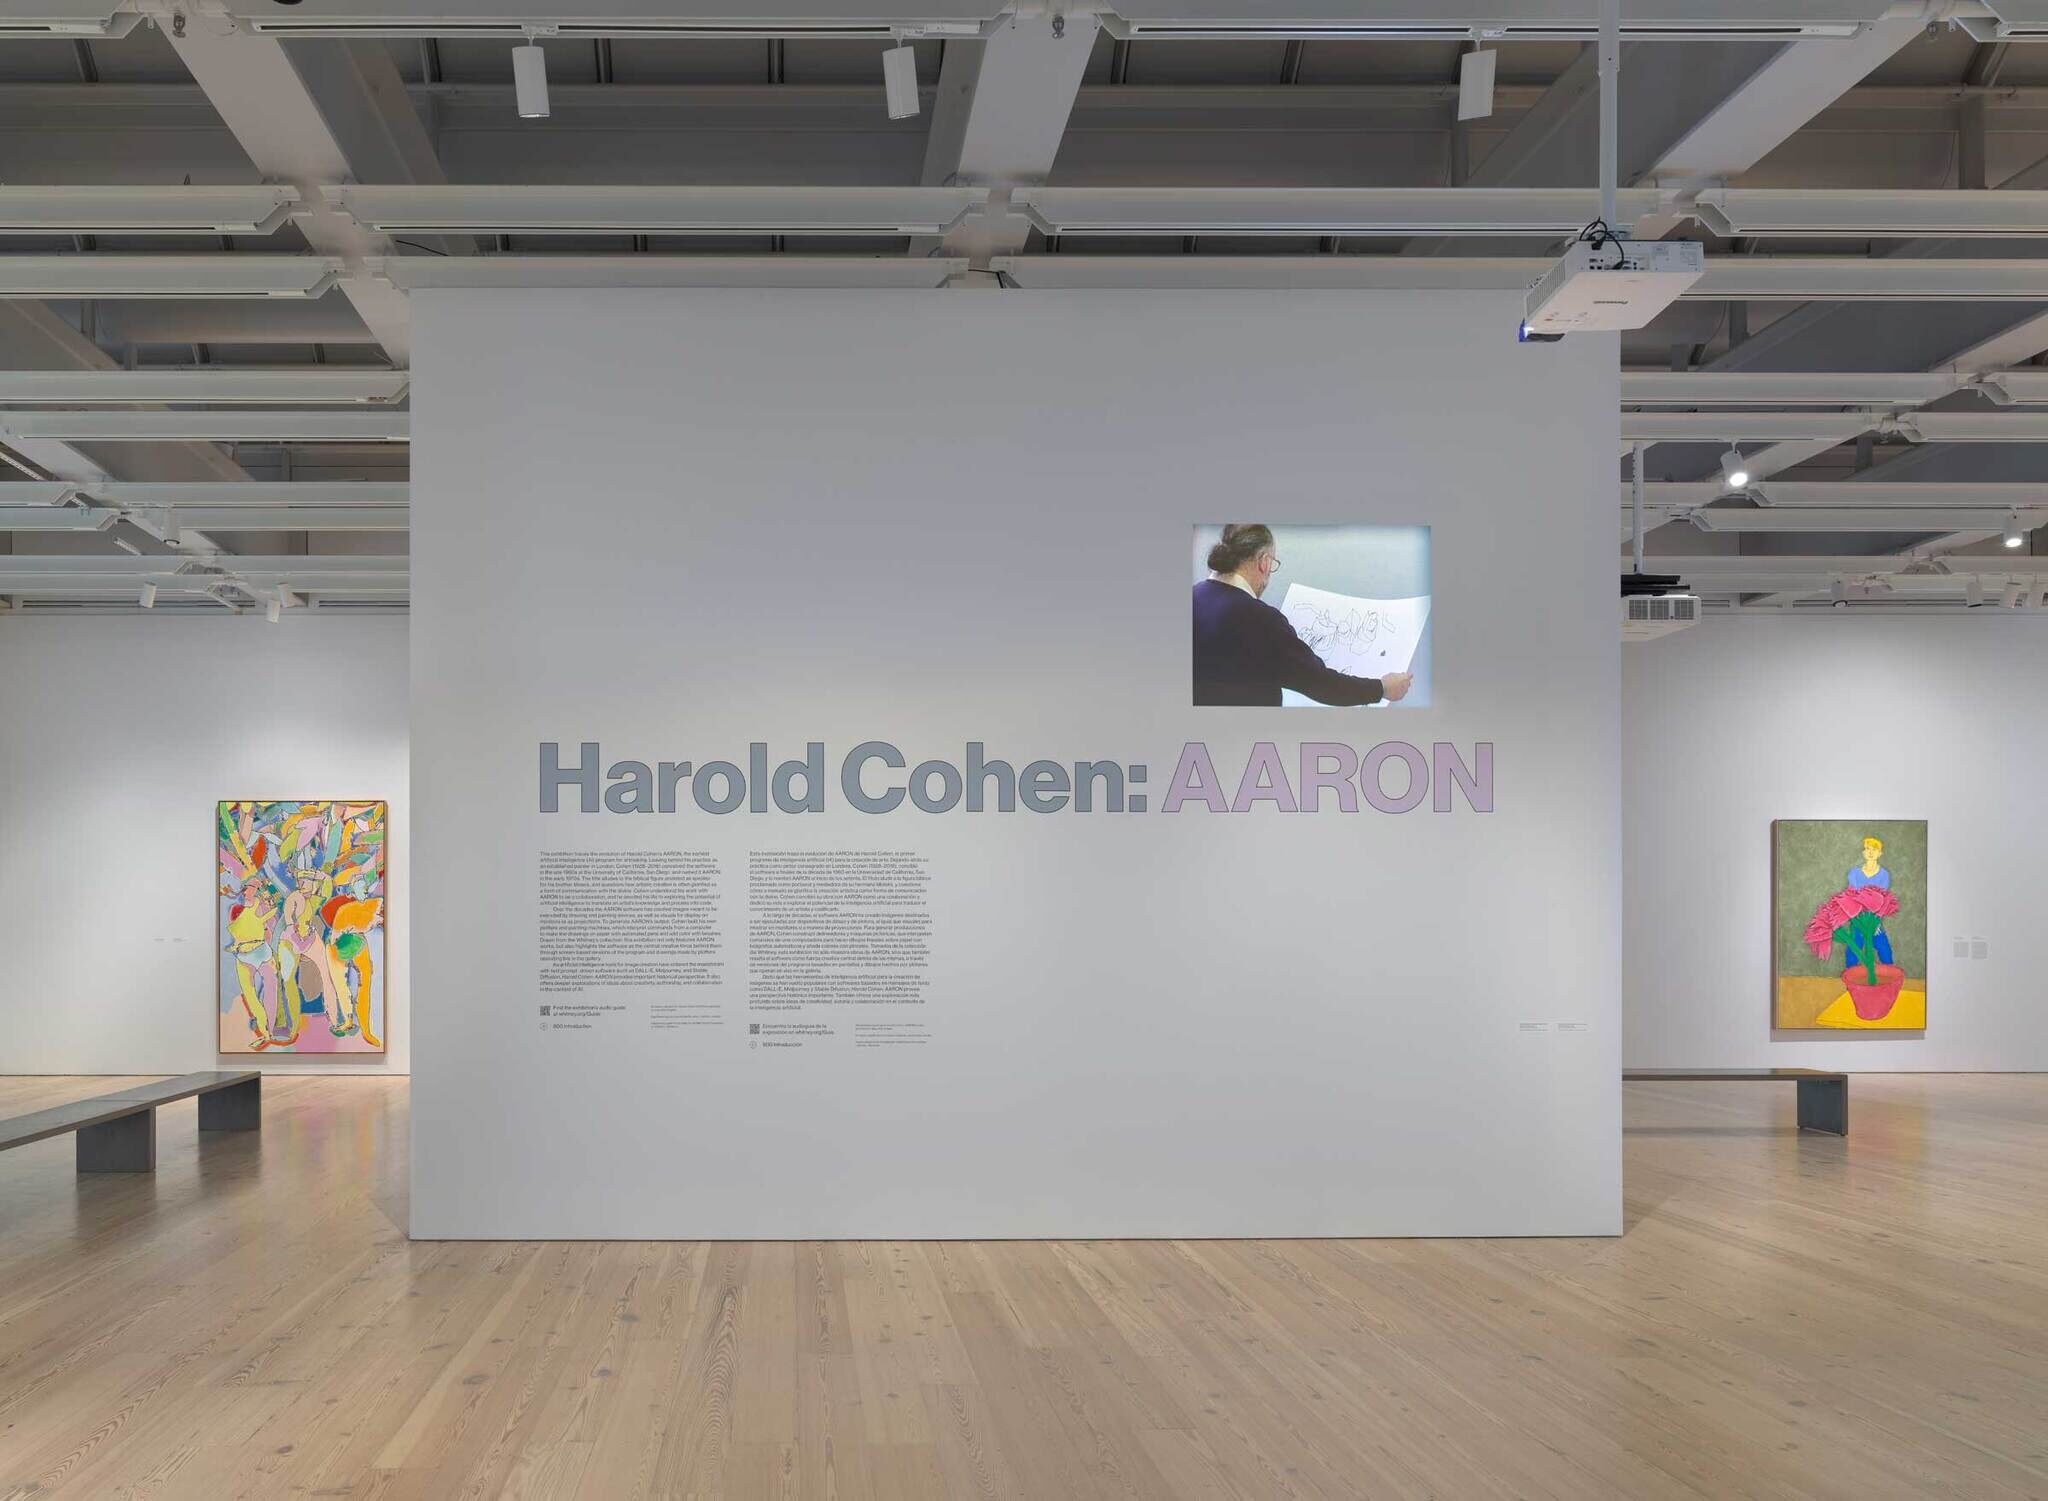 Exhibition space with "Harold Cohen: AARON" display, colorful abstract paintings, and a video projection of an artist at work.